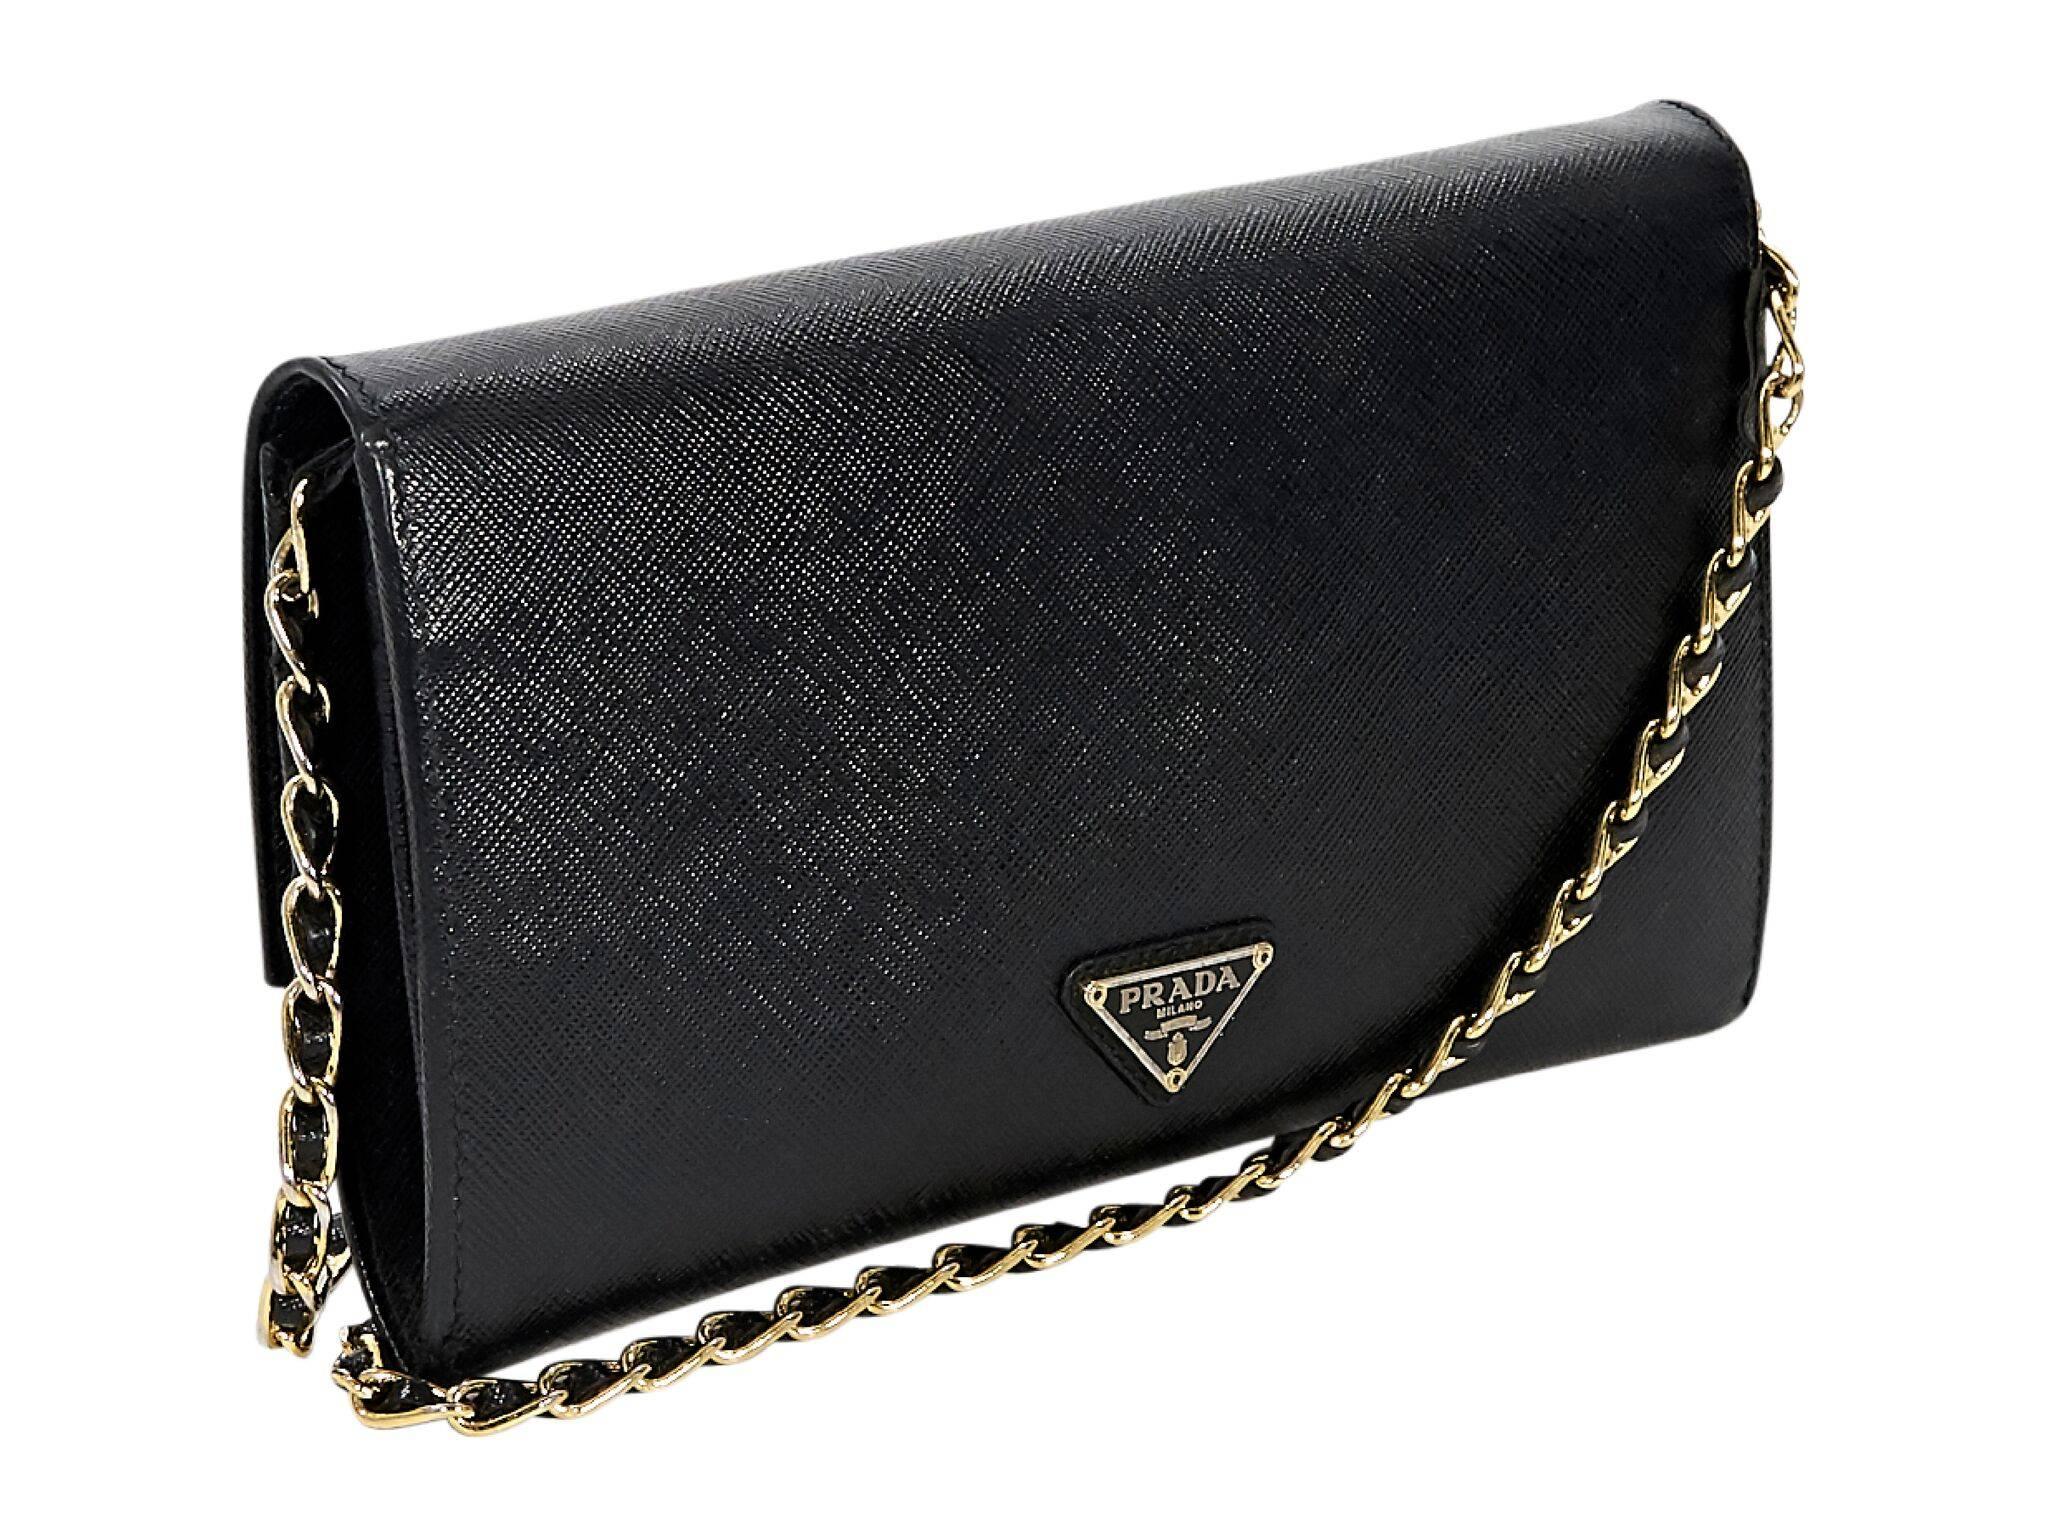 Product details:  Black saffiano leather crossbody bag by Prada.  Detachable chain crossbody strap.  Front flap with twist-lock closure.  Lined interior with inner zip coin pouch, multiple credit card and bill slots.  Goldtone hardware. 9